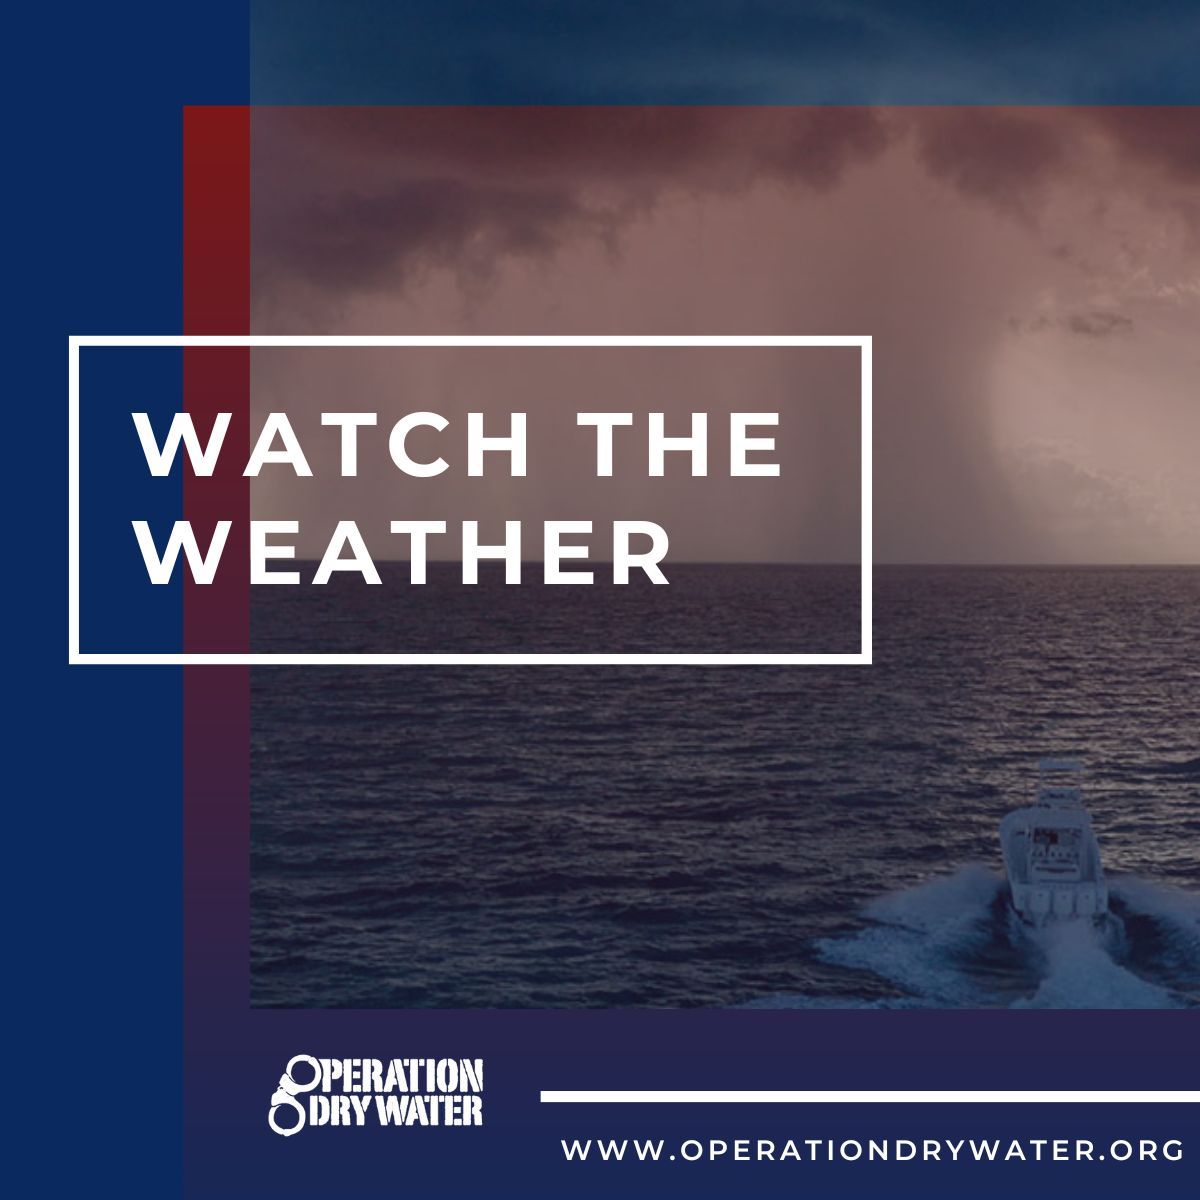 Keeping an eye on the sky is an important part of planning any outdoor adventure. Both your safety and enjoyment of the outdoor trip will depend on the weather conditions. Check weather forecasts before you leave the dock but be aware that the weather can change rapidly. #ODW24